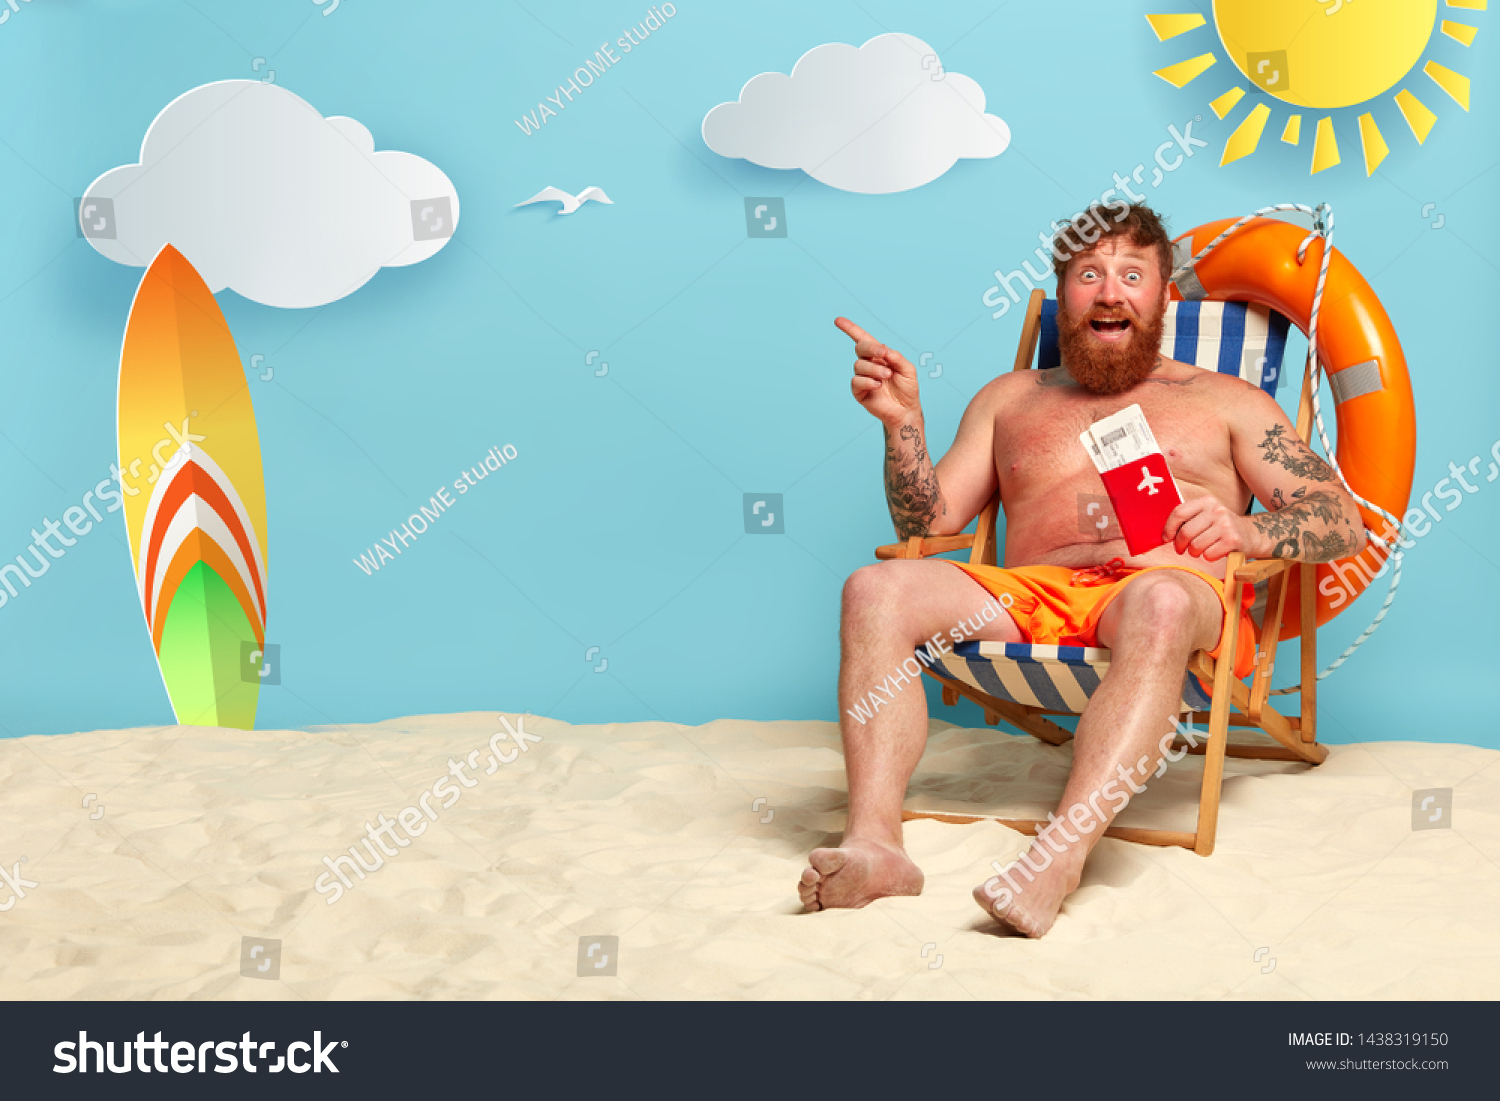 Topless happy redhaired guy shows passport with tickets, points on free space, poses at beach on comfortable chair, likes surfboarding, enjoys tropical resort. Traveling and vacation concept #1438319150